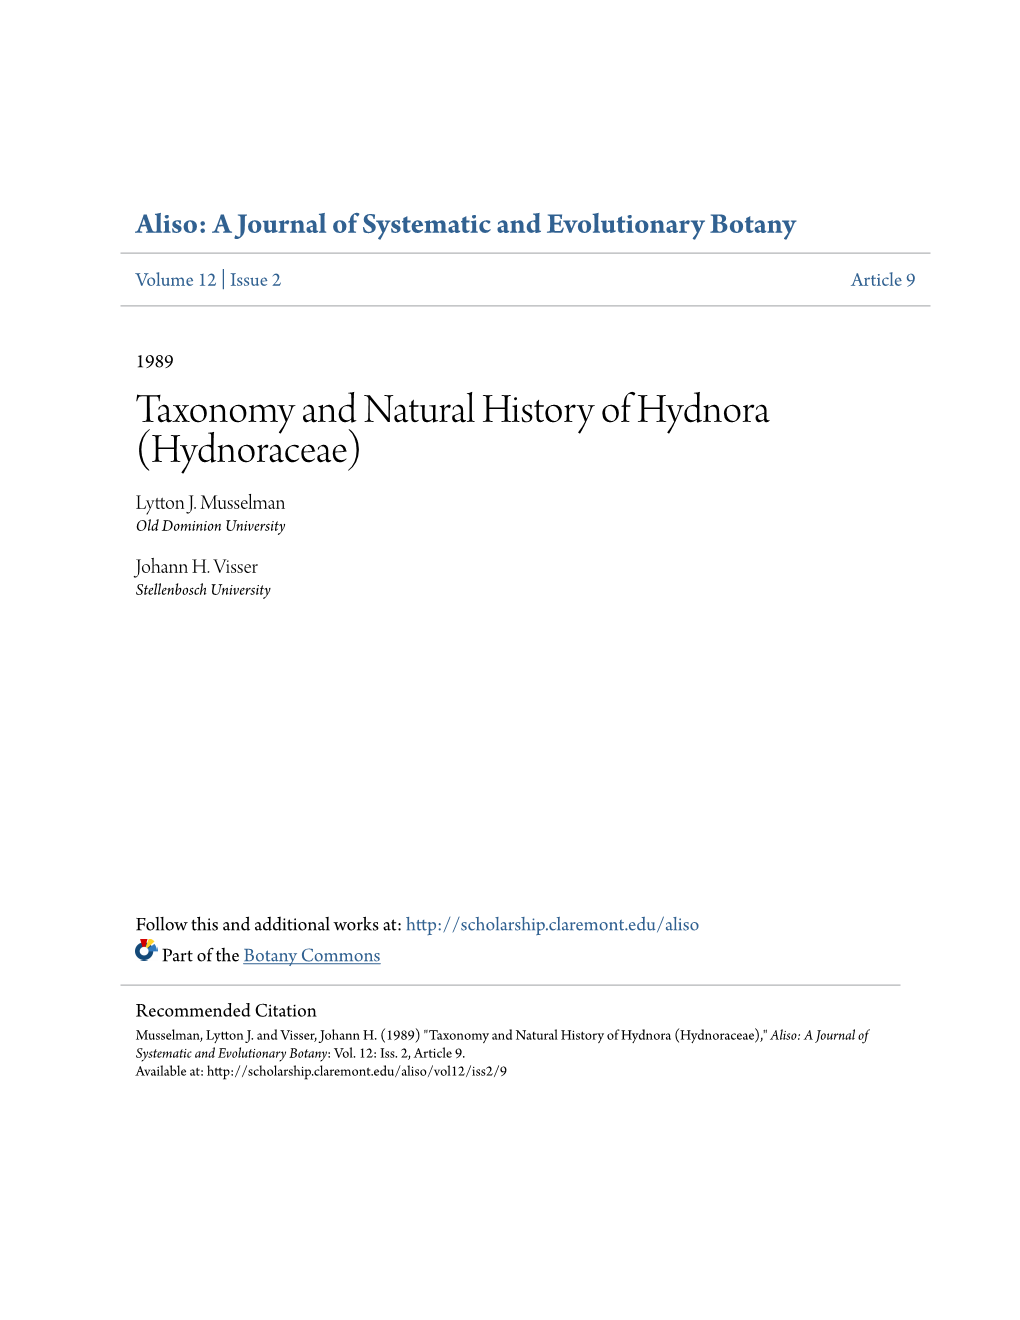 Taxonomy and Natural History of Hydnora (Hydnoraceae) Lytton J